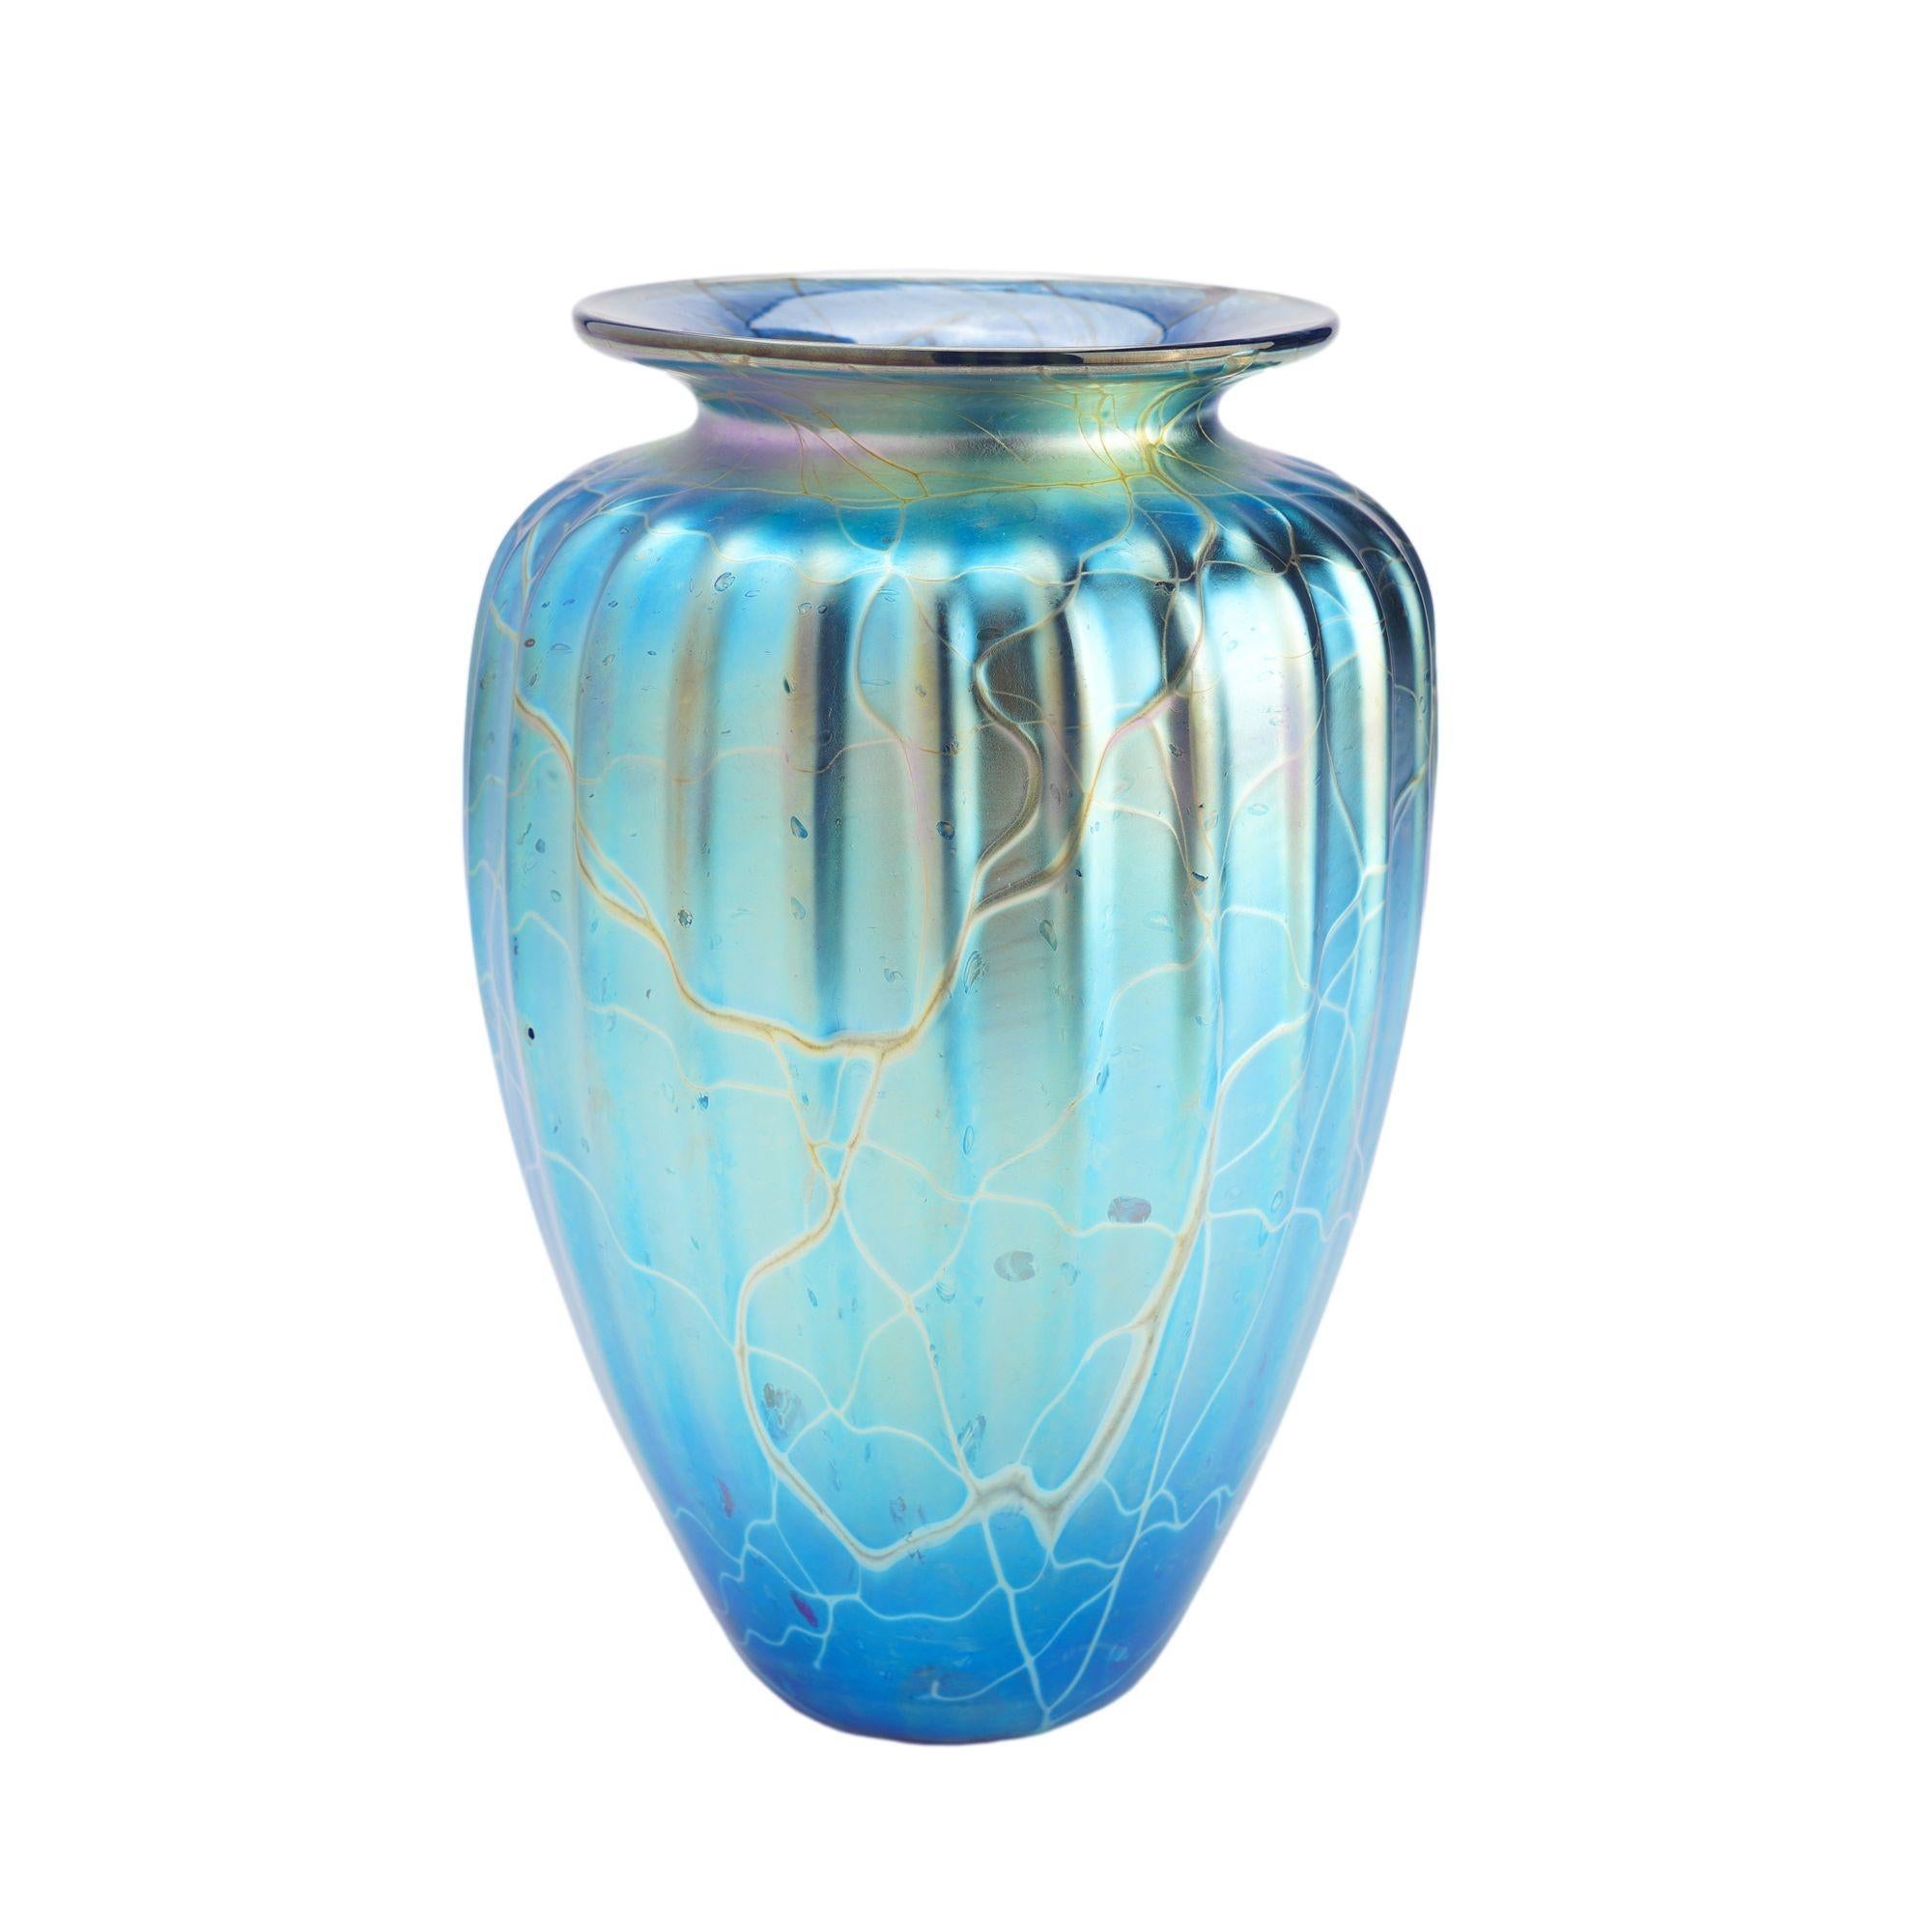 American Iridescent blue blown glass vase by Mayauel Ward, 2015 For Sale